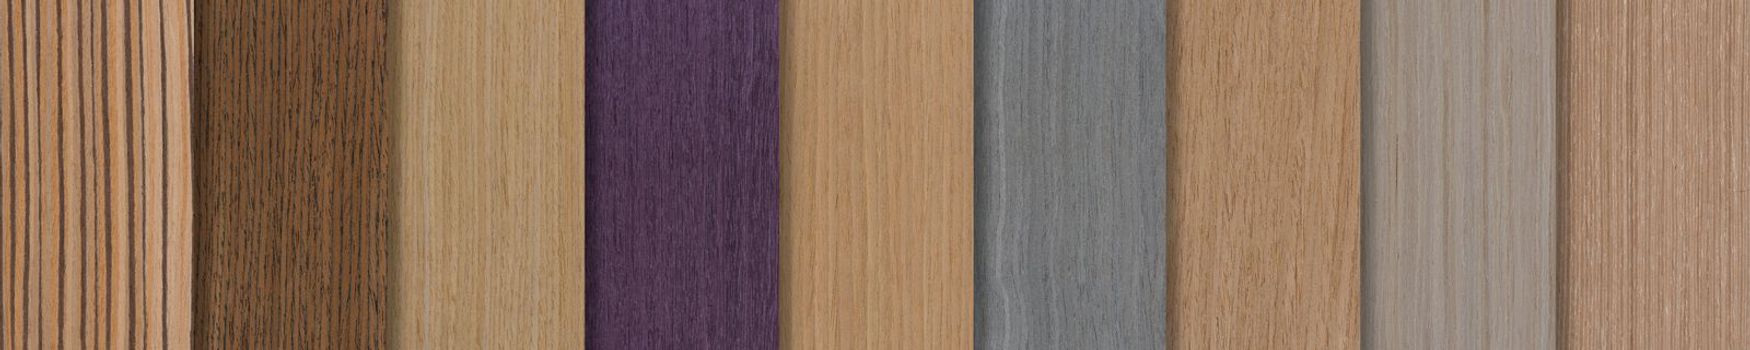 Samples of wood of different species. Pieces of wood veneer in different shades and textures. Samples of wood for the production of floor furniture or doors top view